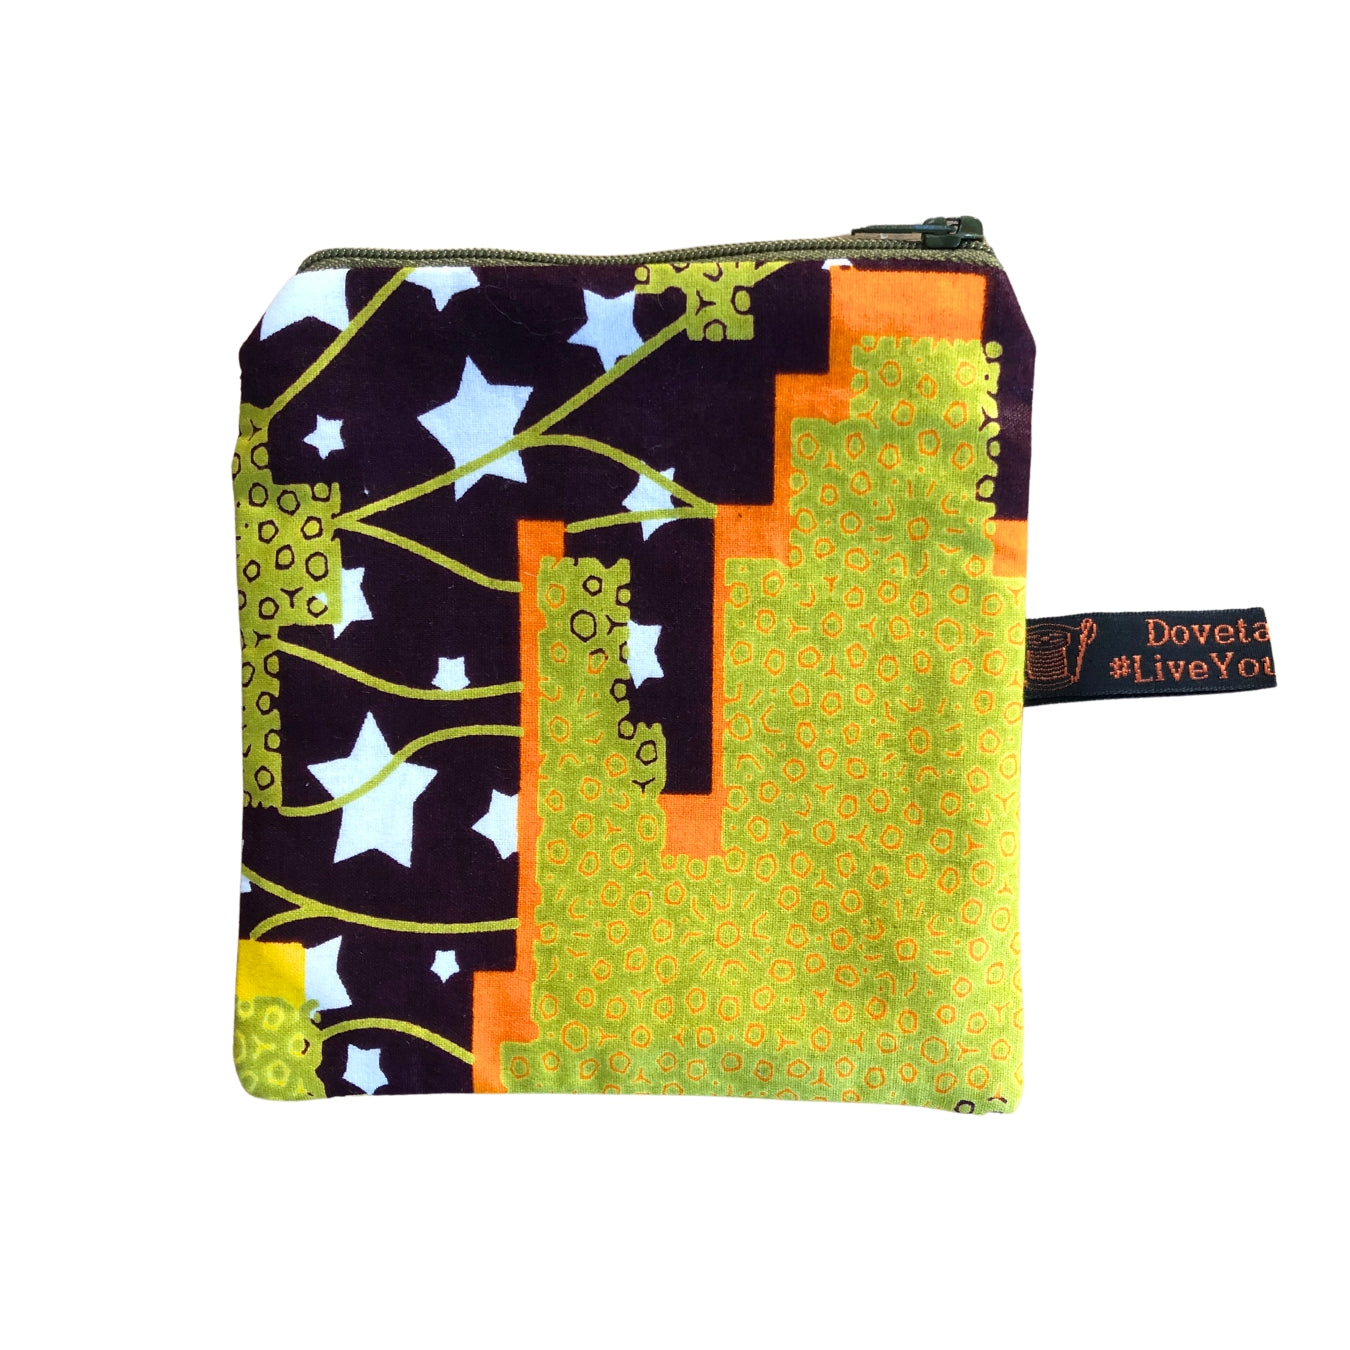 A colourful fabric pouch with a zipper on a white background.